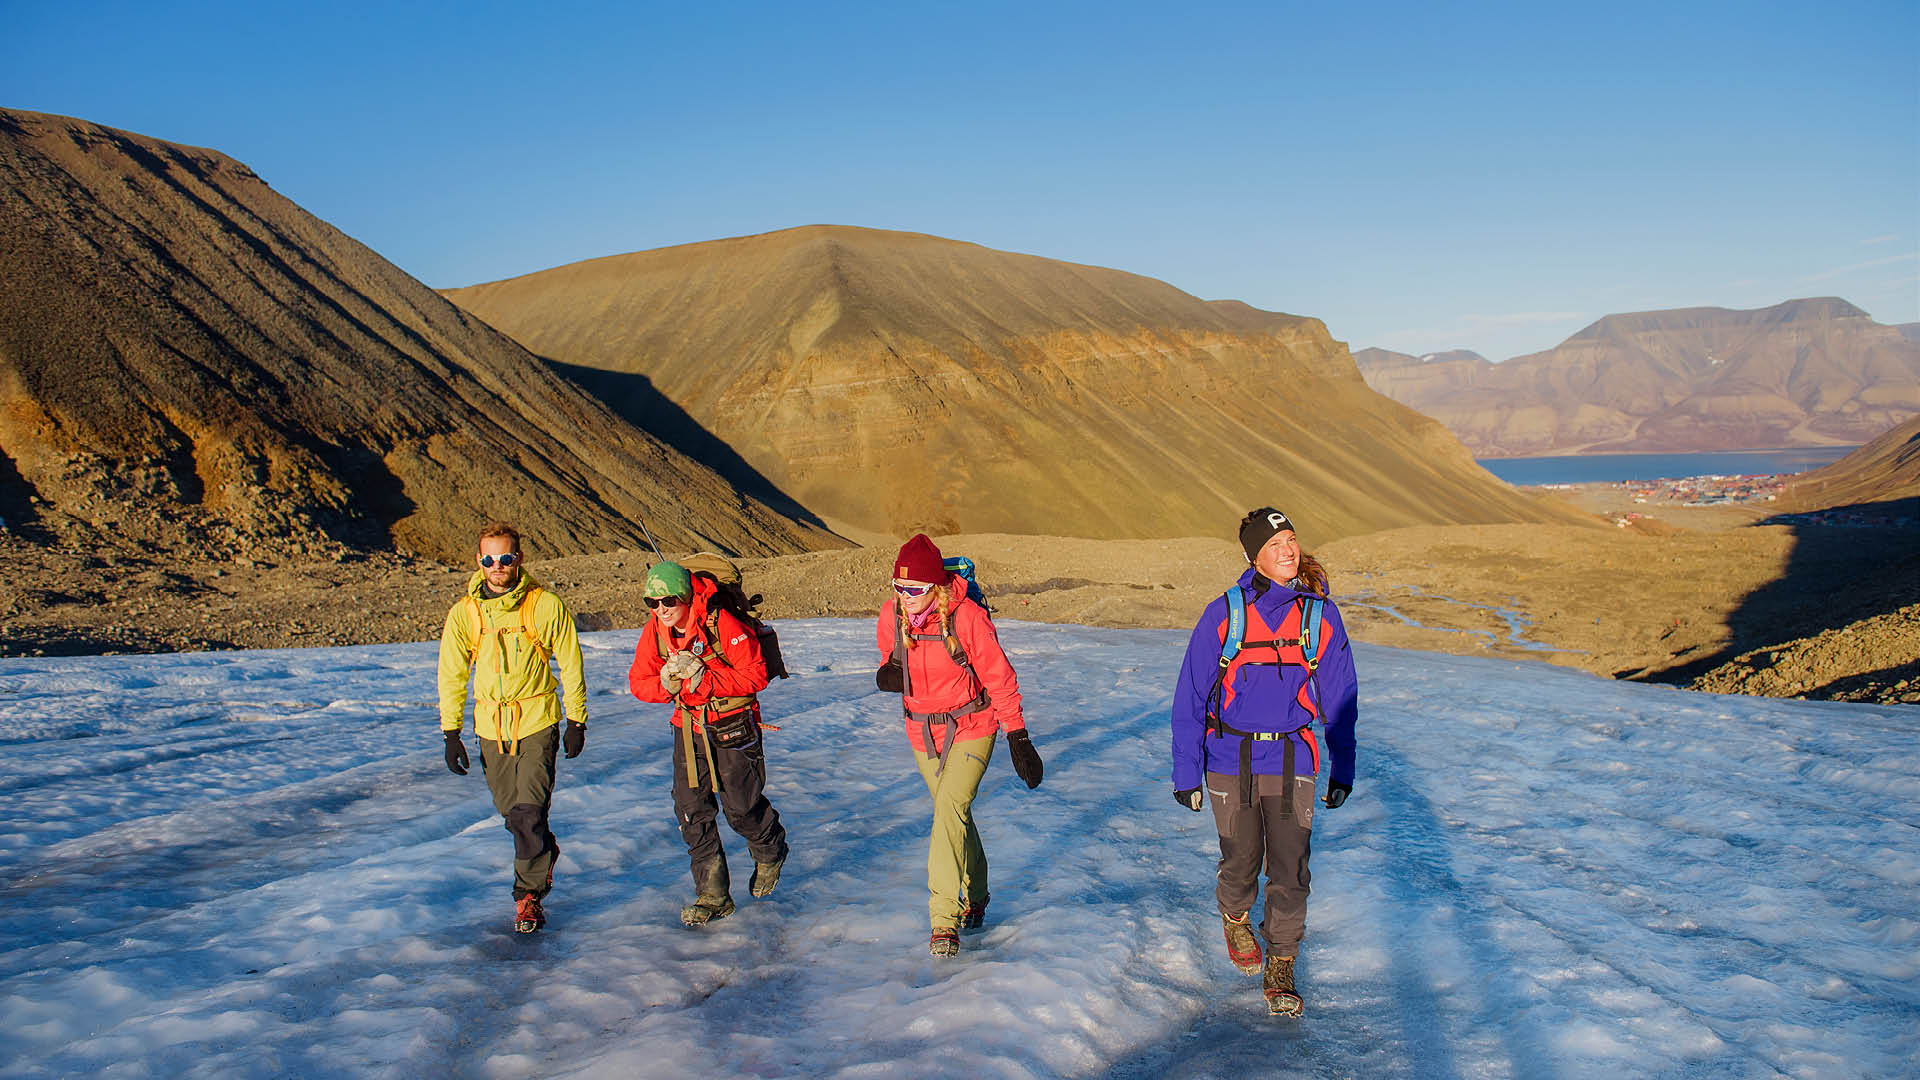 WHAT TO EXPECT FROM A SUMMER HIKING TRIP TO LONGYEARBYEN, SVALBARD